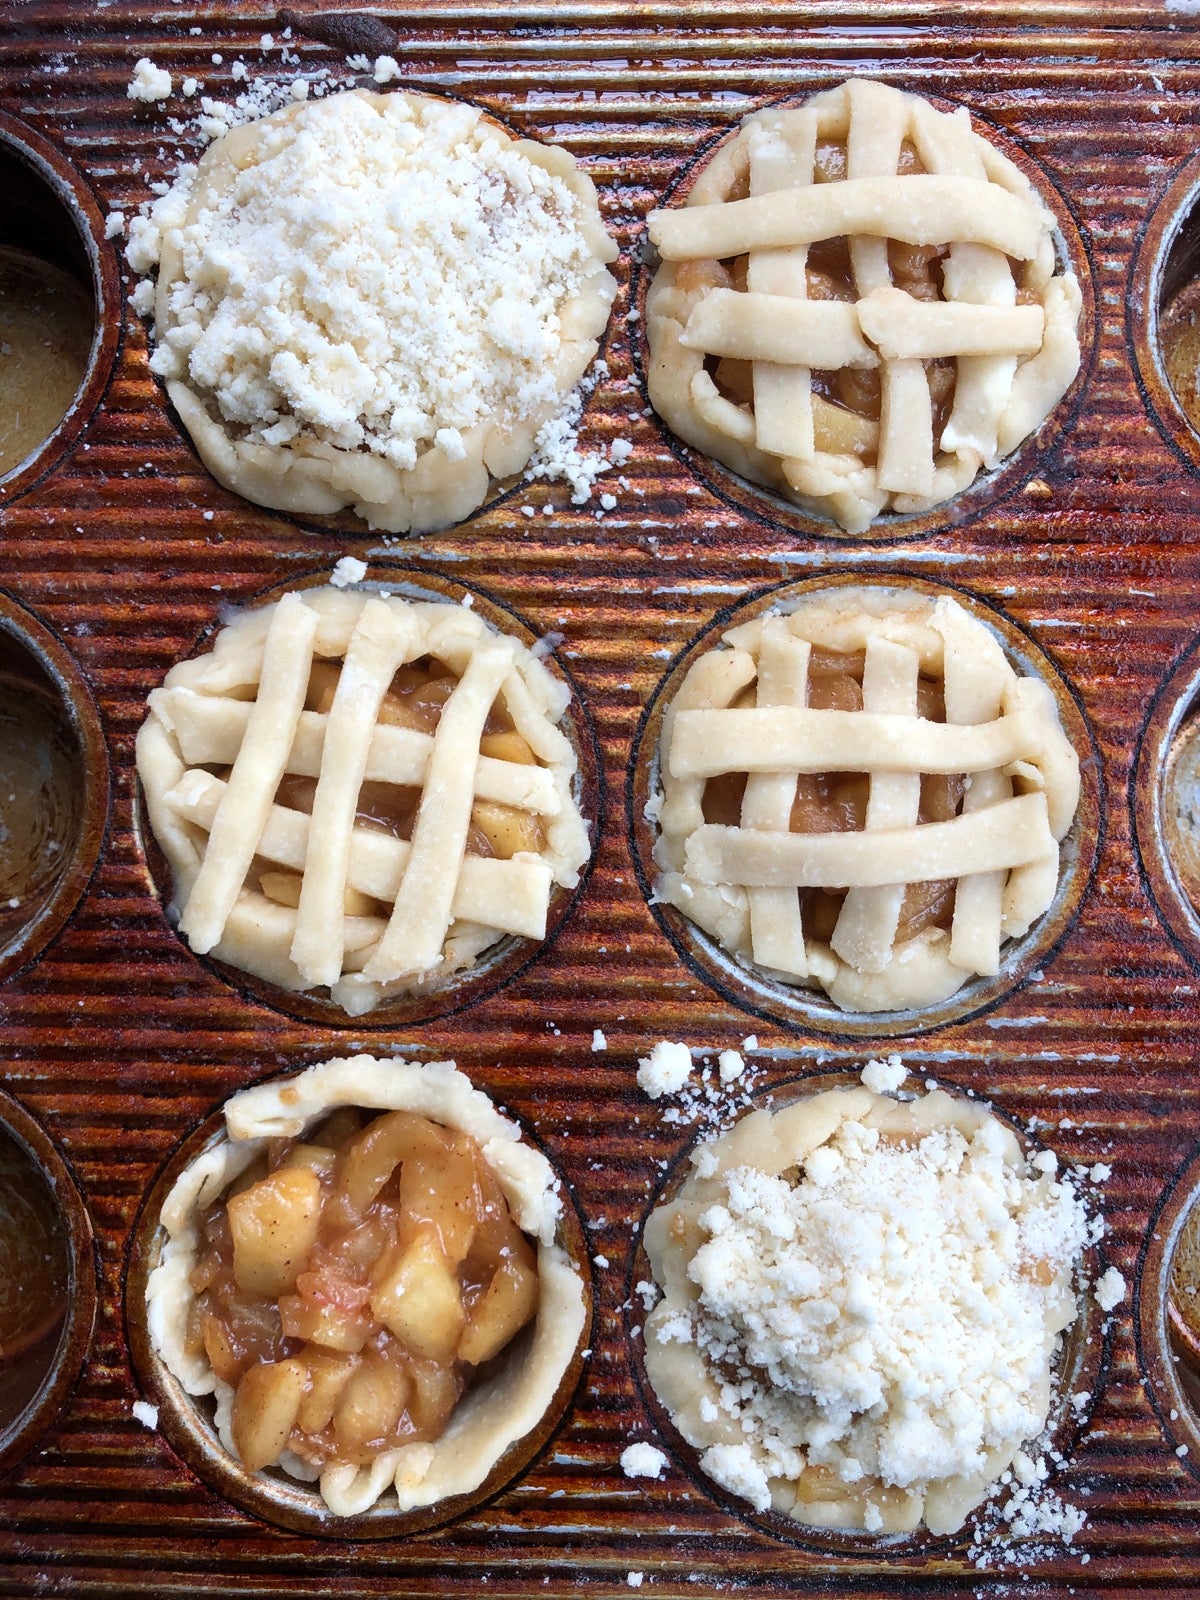 Six mini pies in a muffin pan, ready to bake, showing lattice top crusts and crumb top crusts.